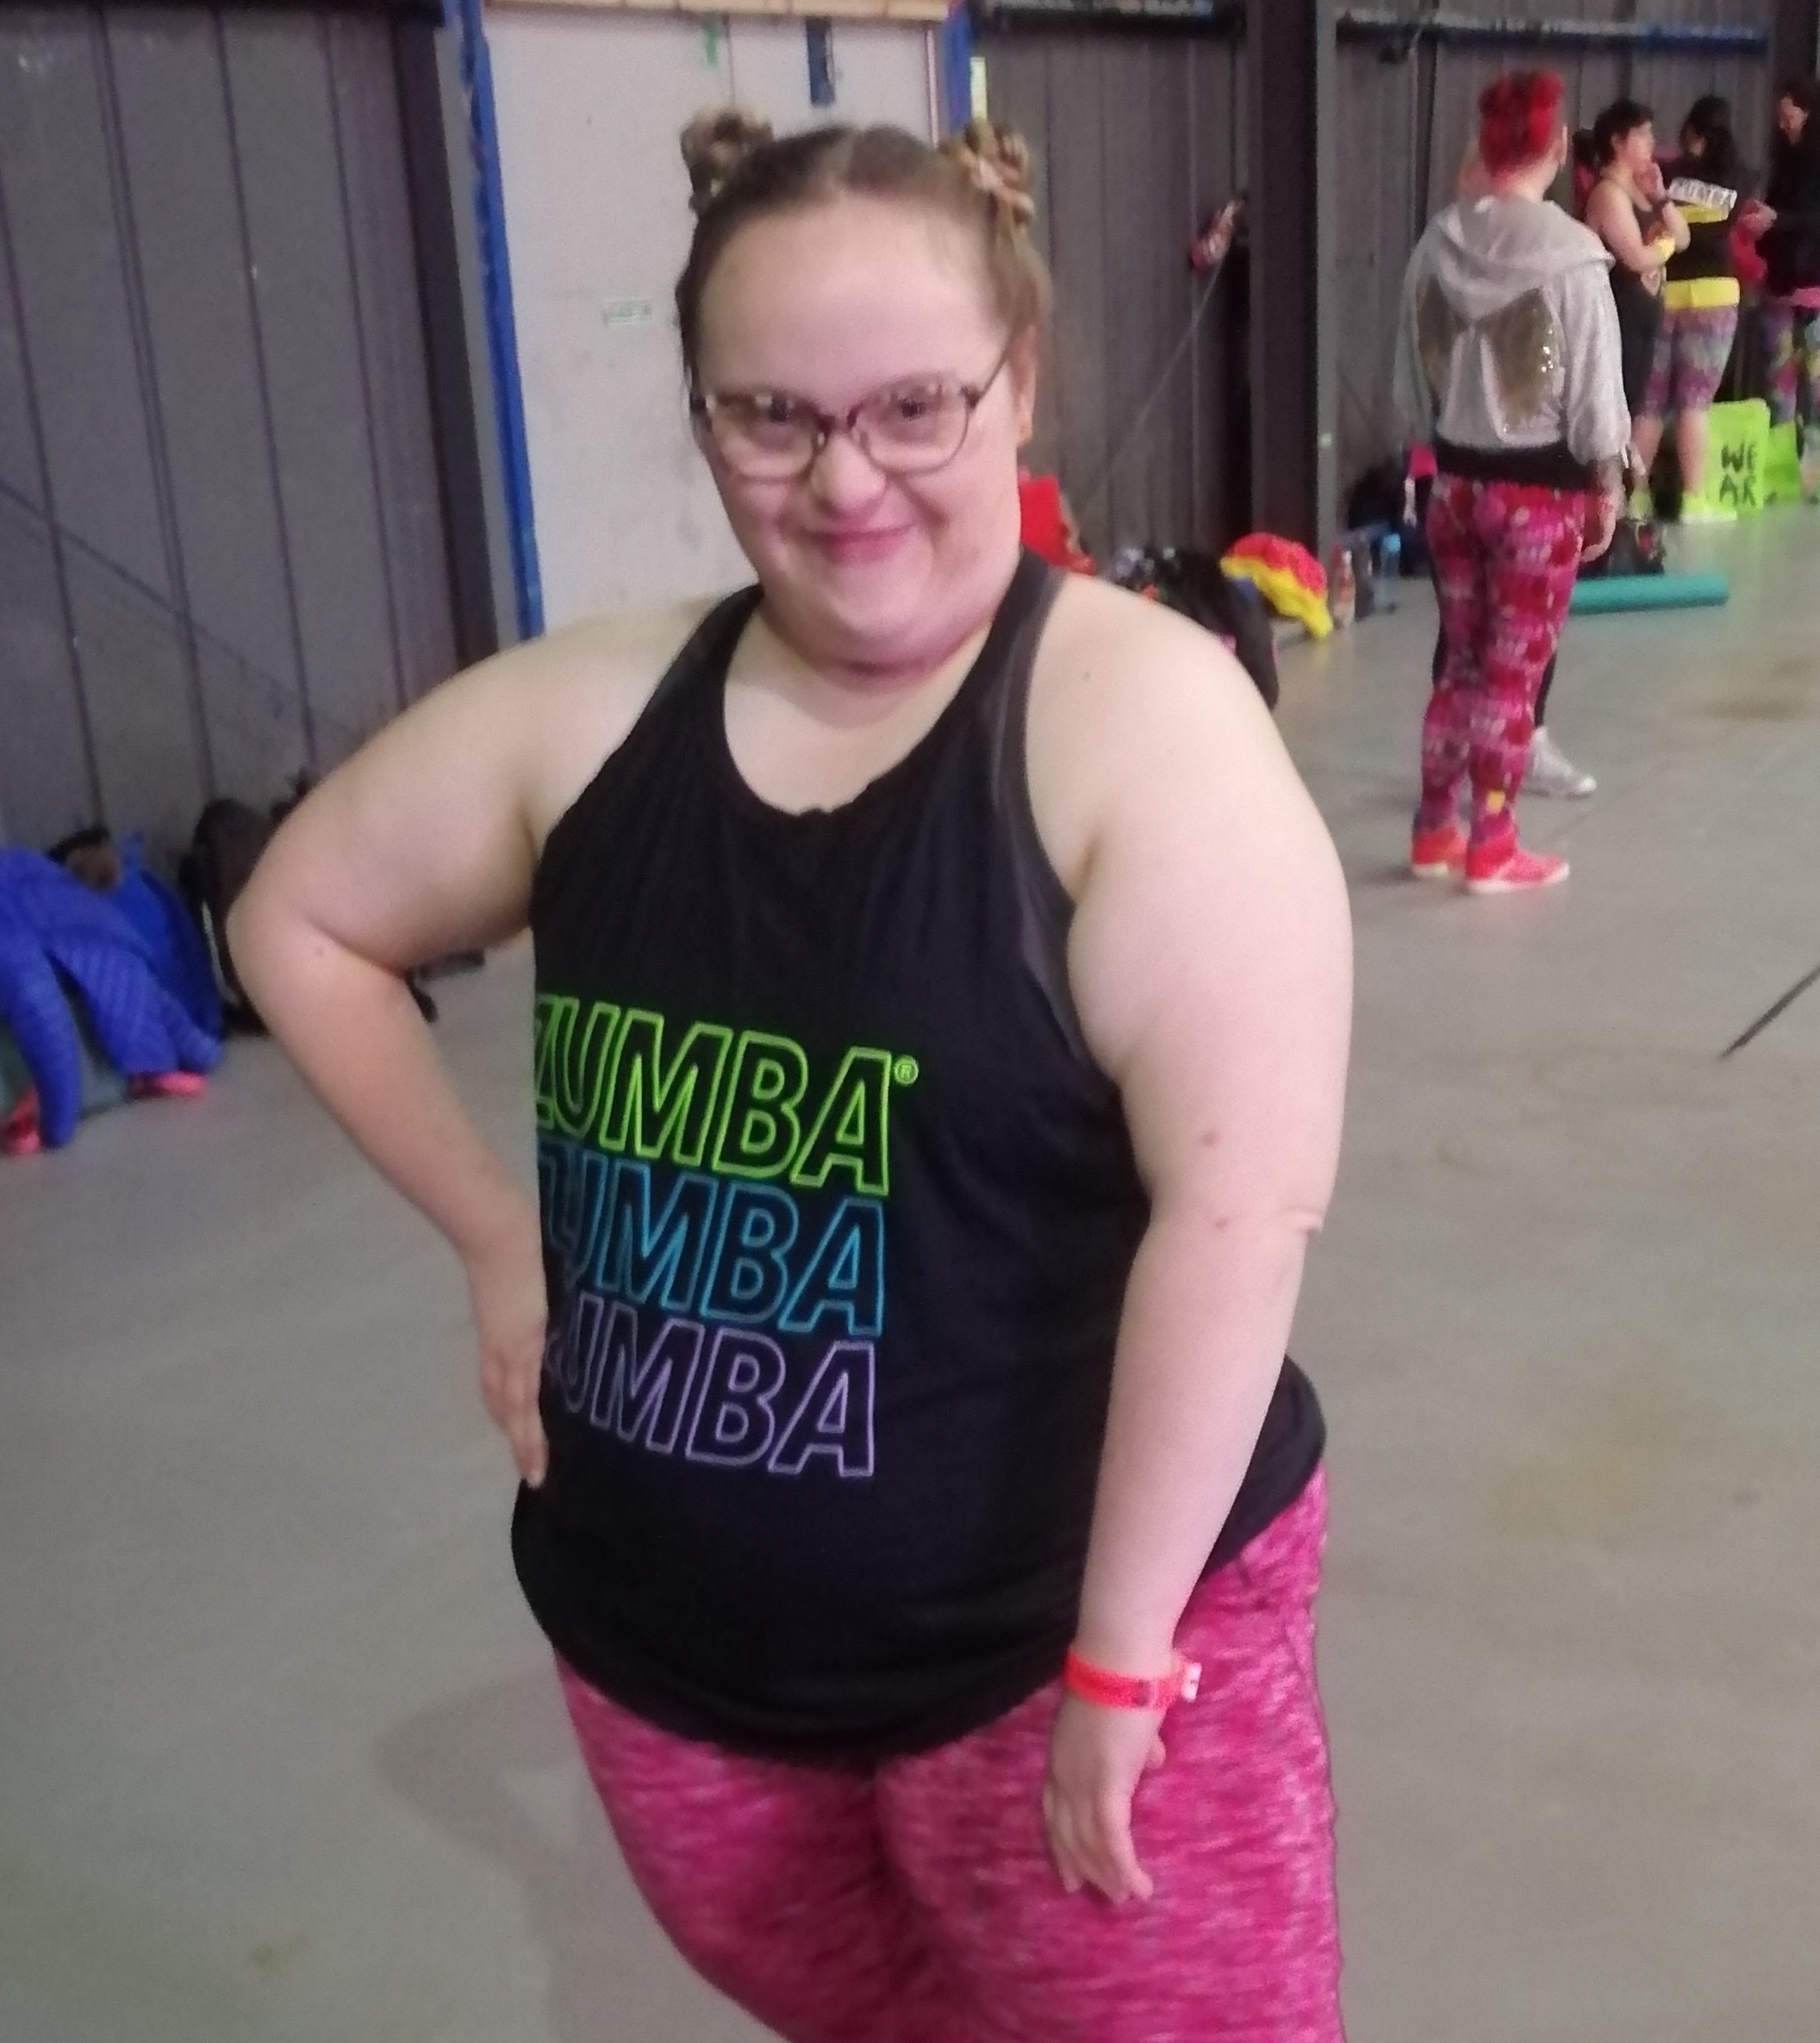 A young woman who has Down's syndrome in exercise gear poses for a photo